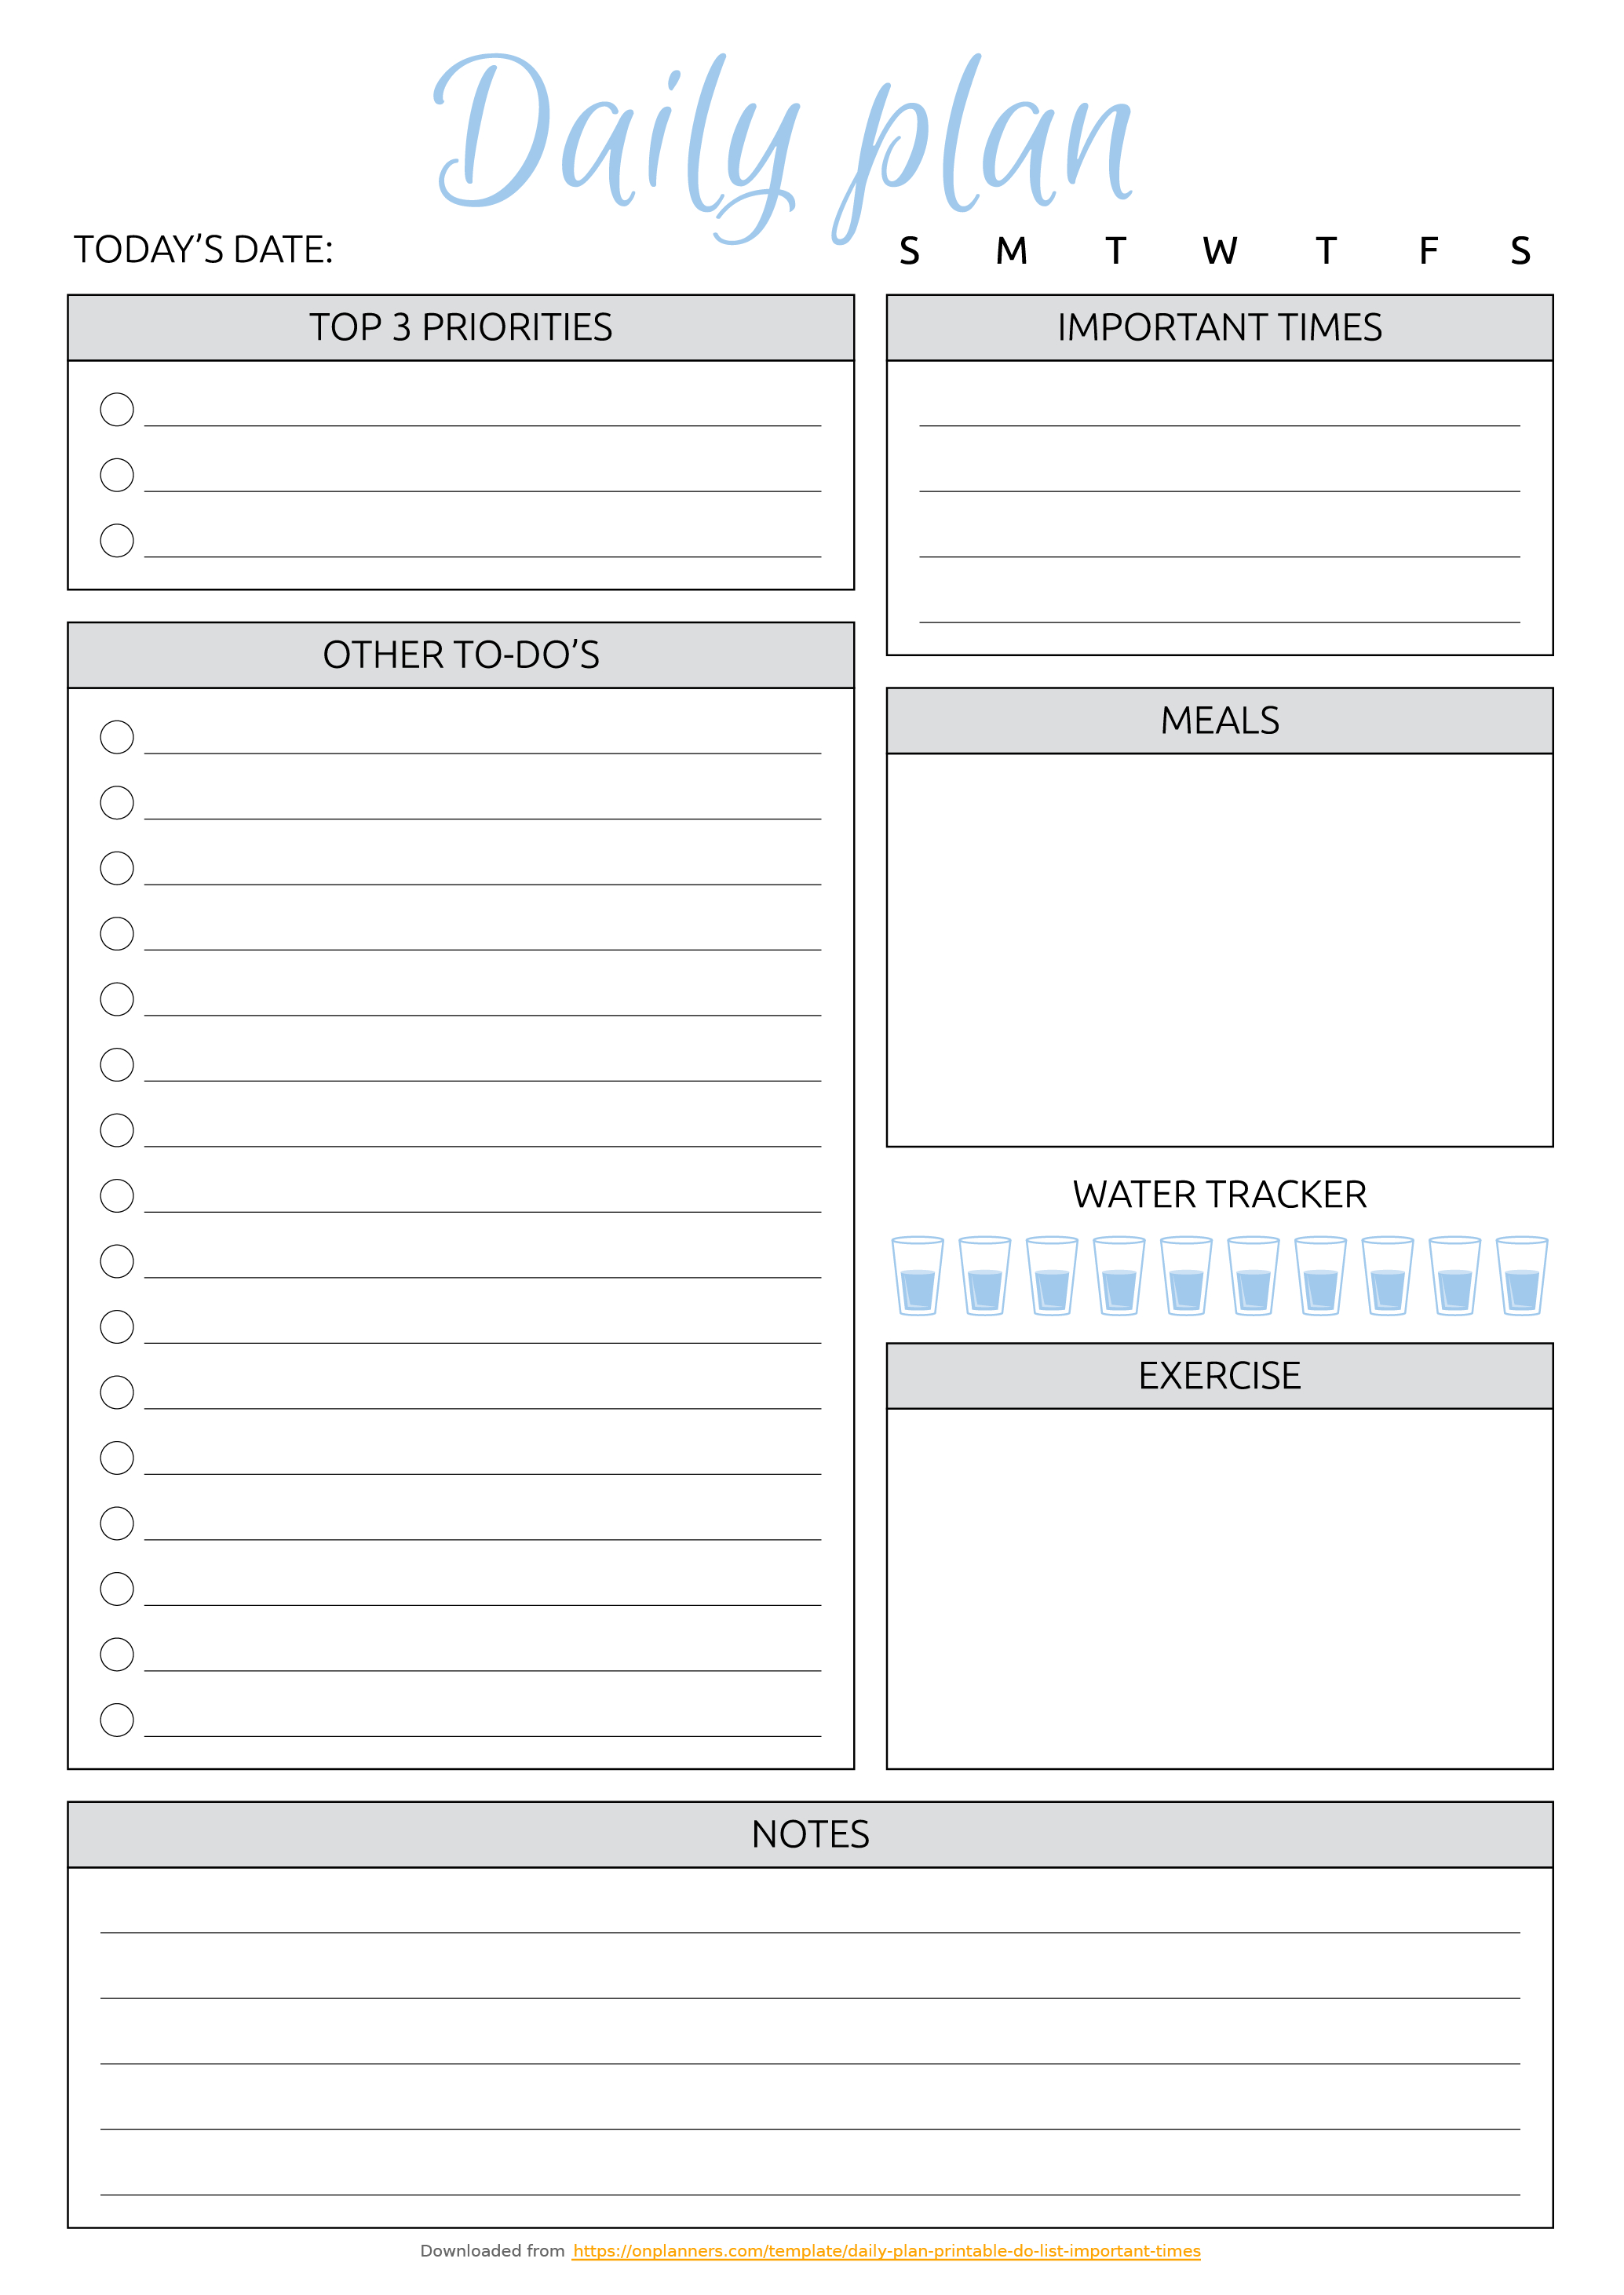 Free Printable Daily Plan With To-Do List &amp;amp; Important Times Pdf Download - Weekly To Do List Free Printable